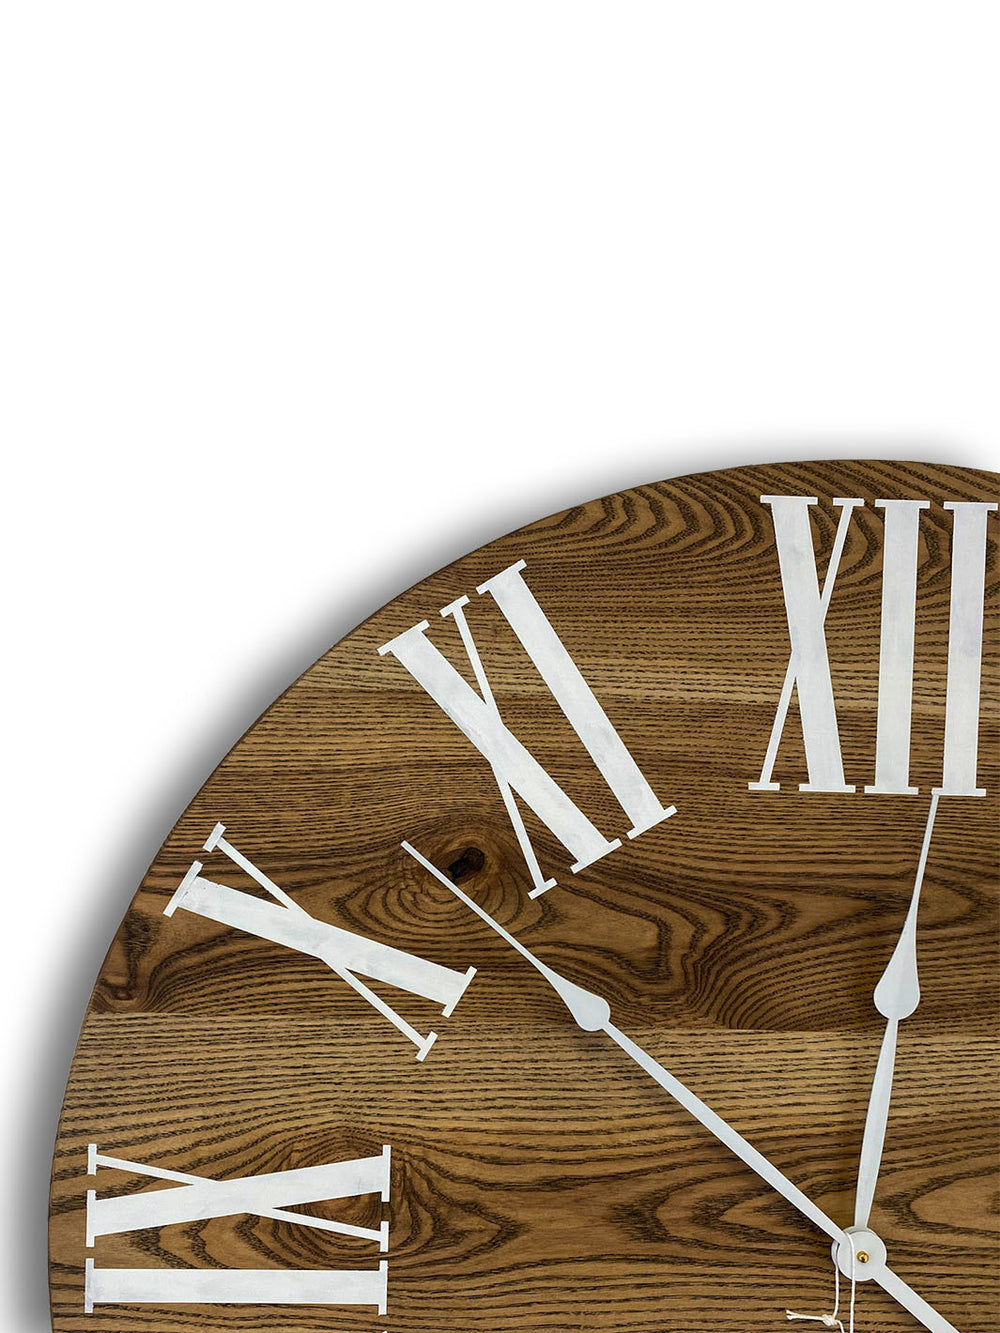 Earthly Comfort 36" Dark Stained Ash Wood Wall Clock Earthly Comfort Clocks 2027-1